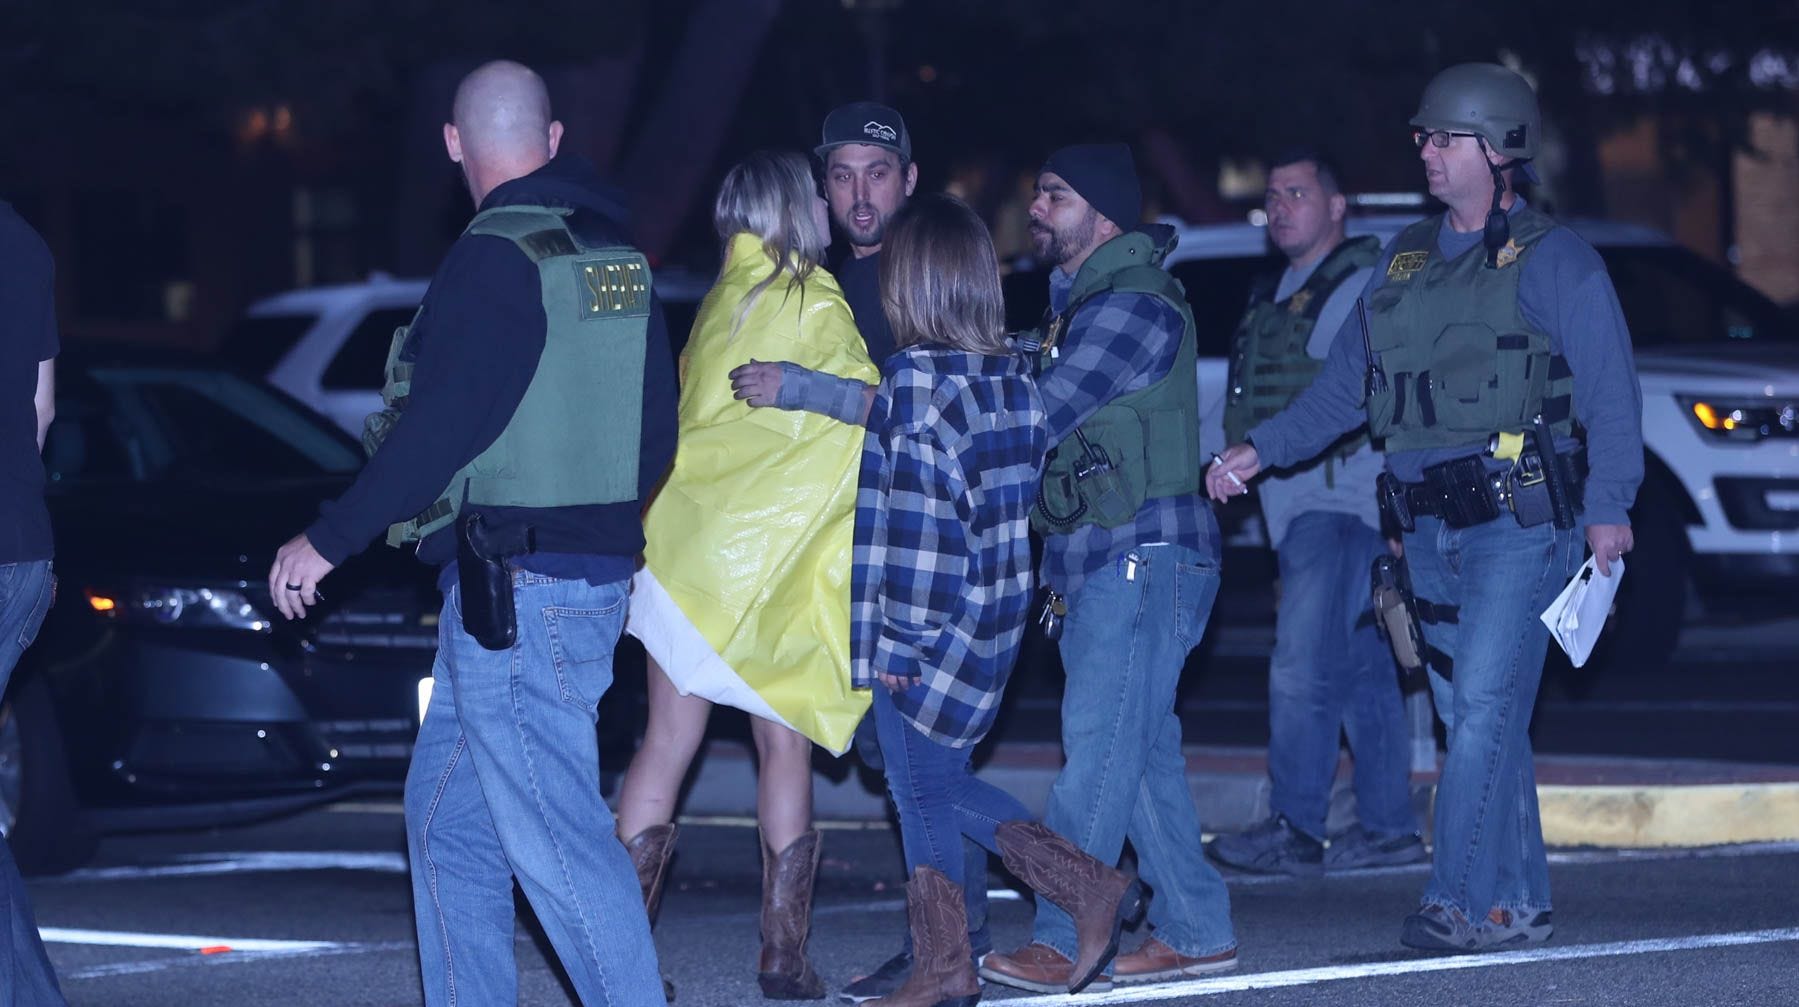 Thousand Oaks Shooting Is The 307th Mass Shooting In 2018